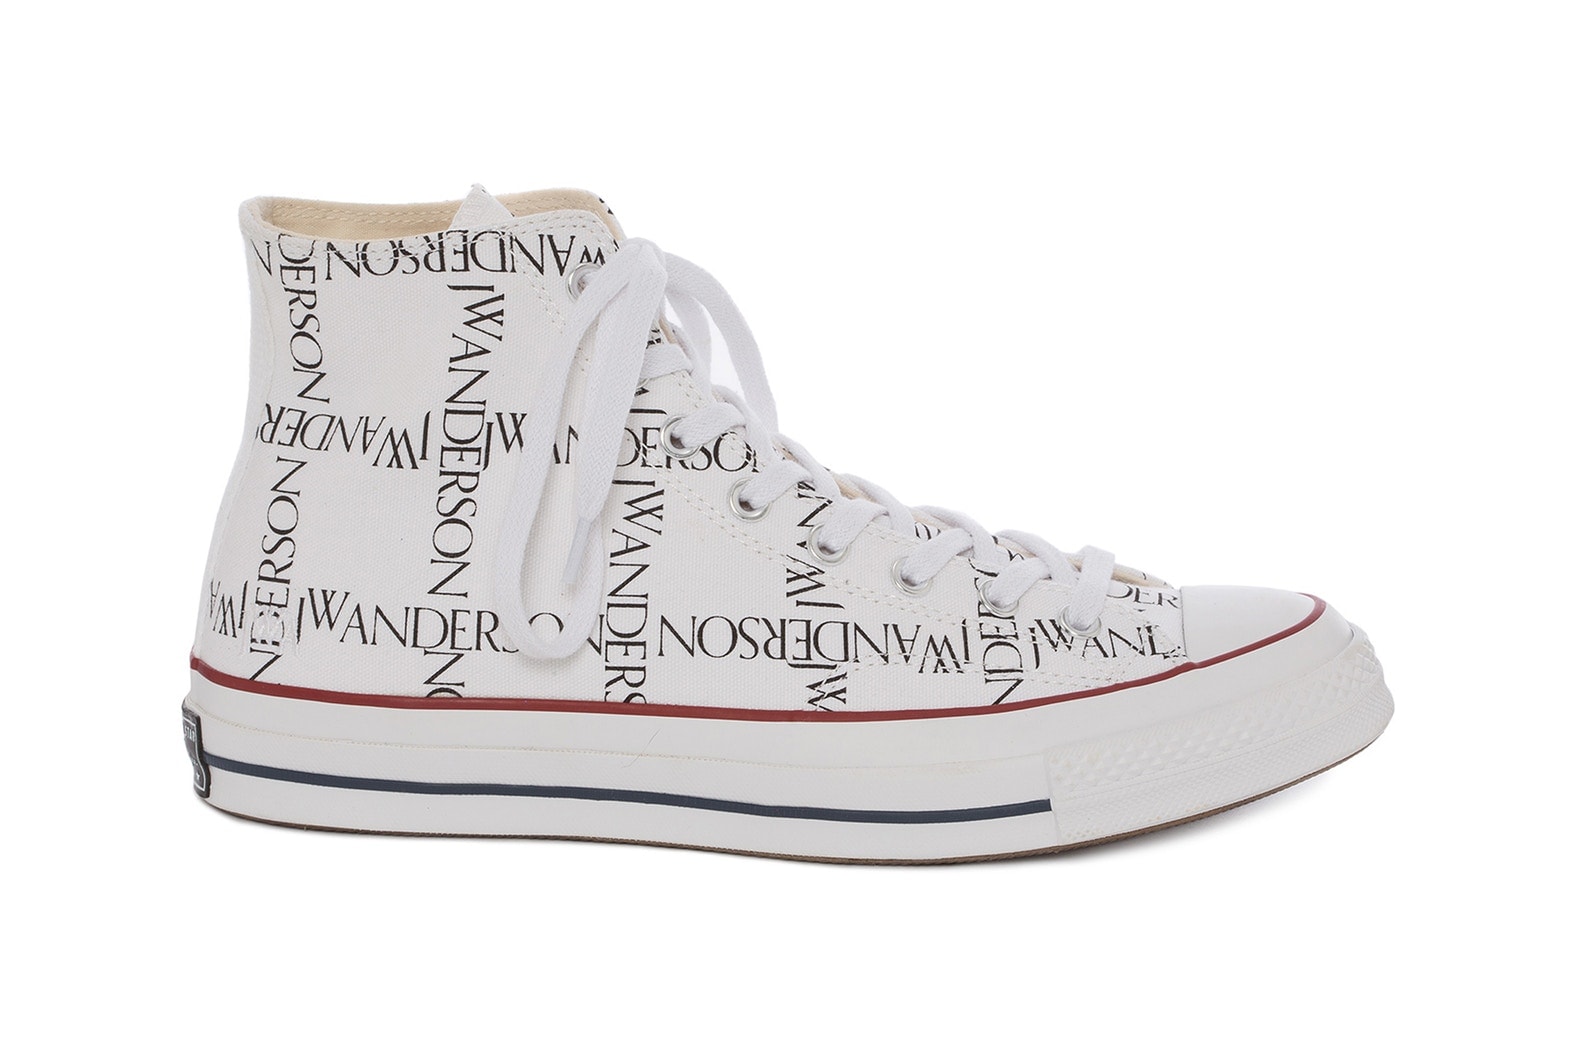 J.W.Anderson x Converse Collection Release Info